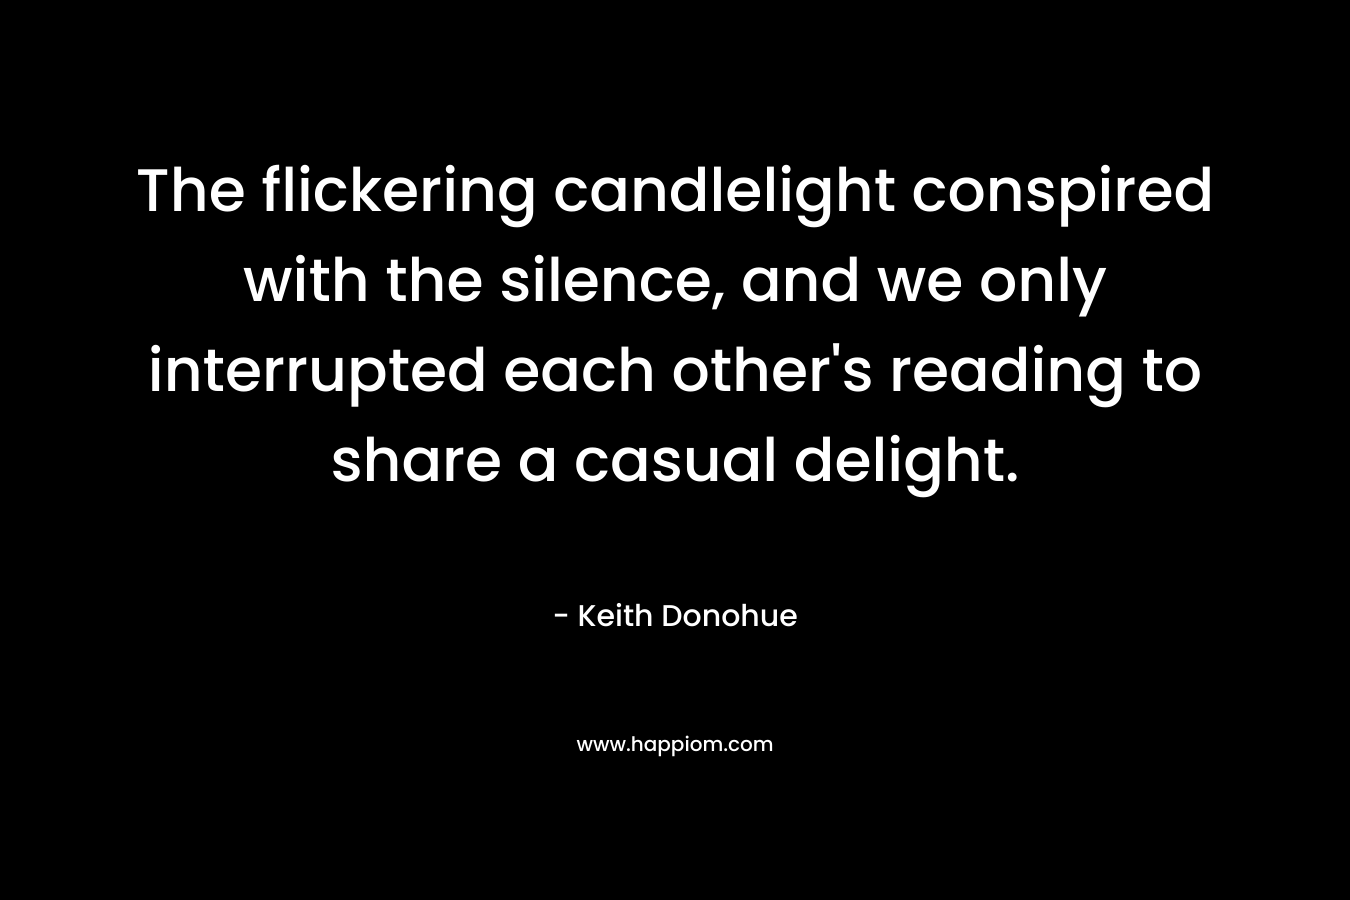 The flickering candlelight conspired with the silence, and we only interrupted each other's reading to share a casual delight.